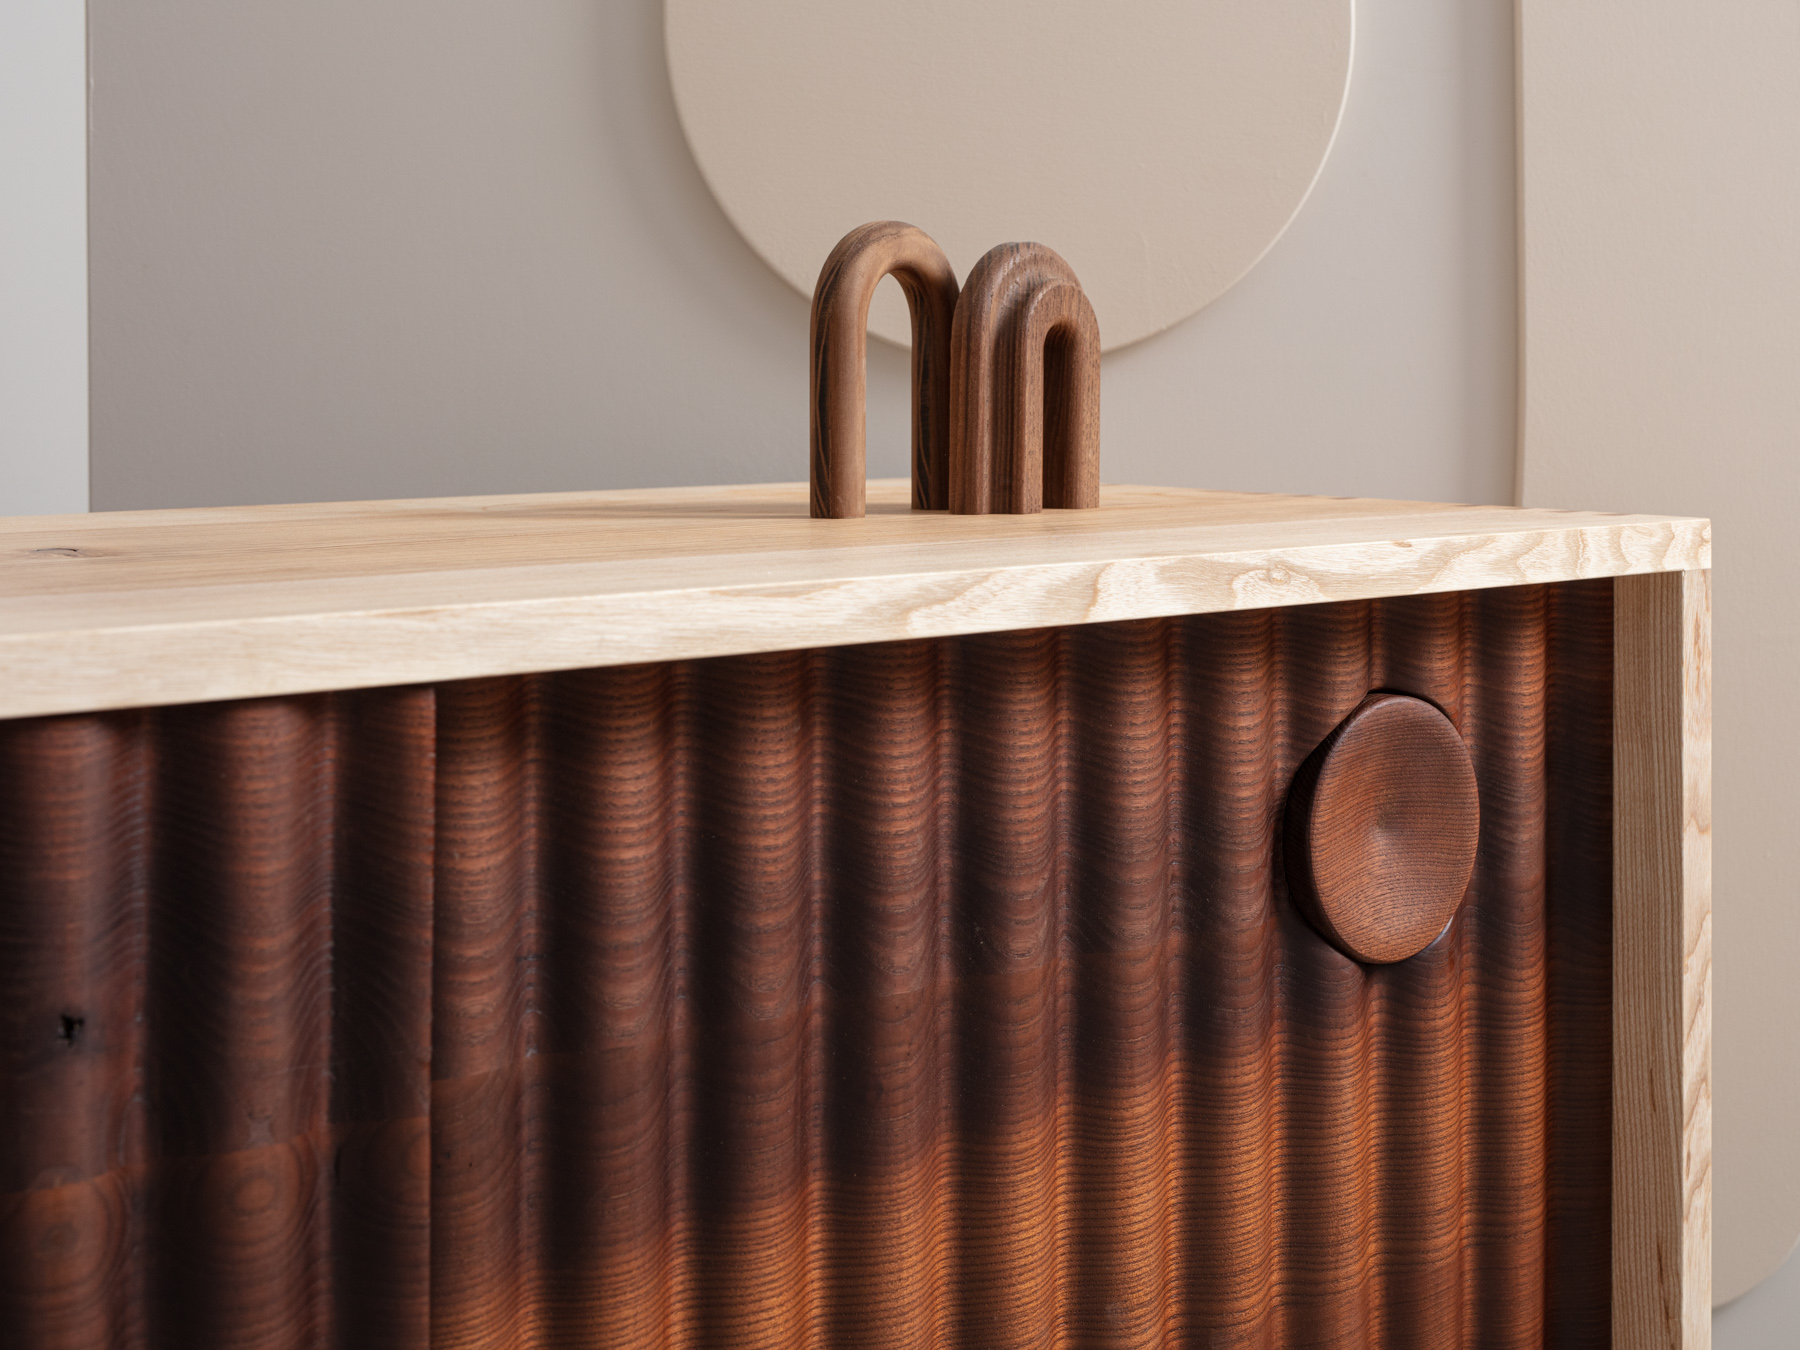 Bowater Media Unit, the signature ripple facade is digitally profiled from brown oak, hand-turned leg and handle details with a removable base, The carcass is made from solid timber with dovetail joinery